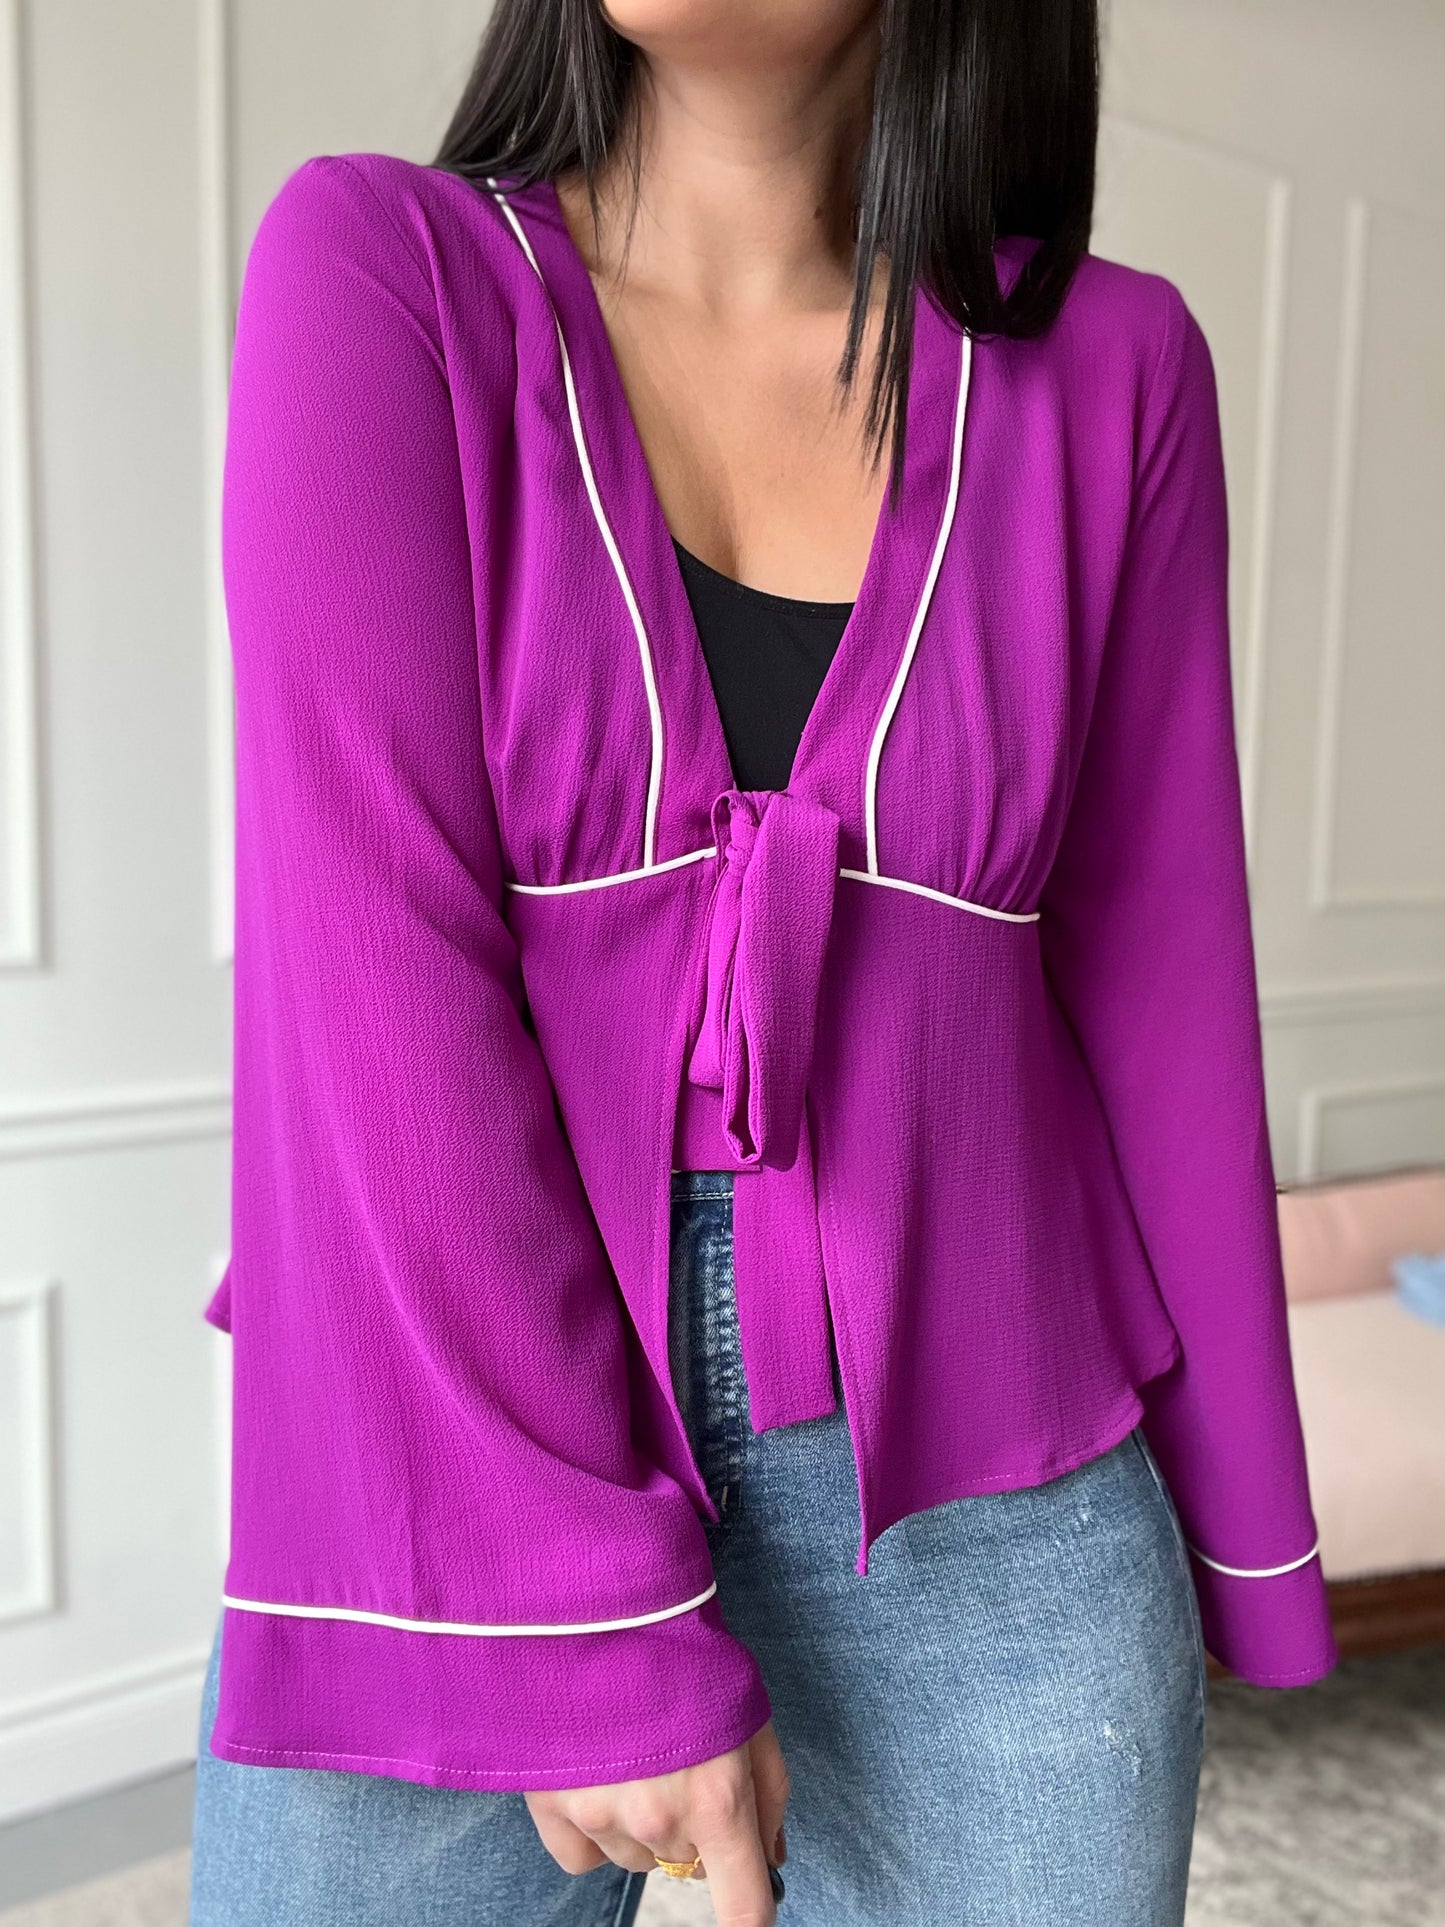 Groovy Magenta Blouse - Size M